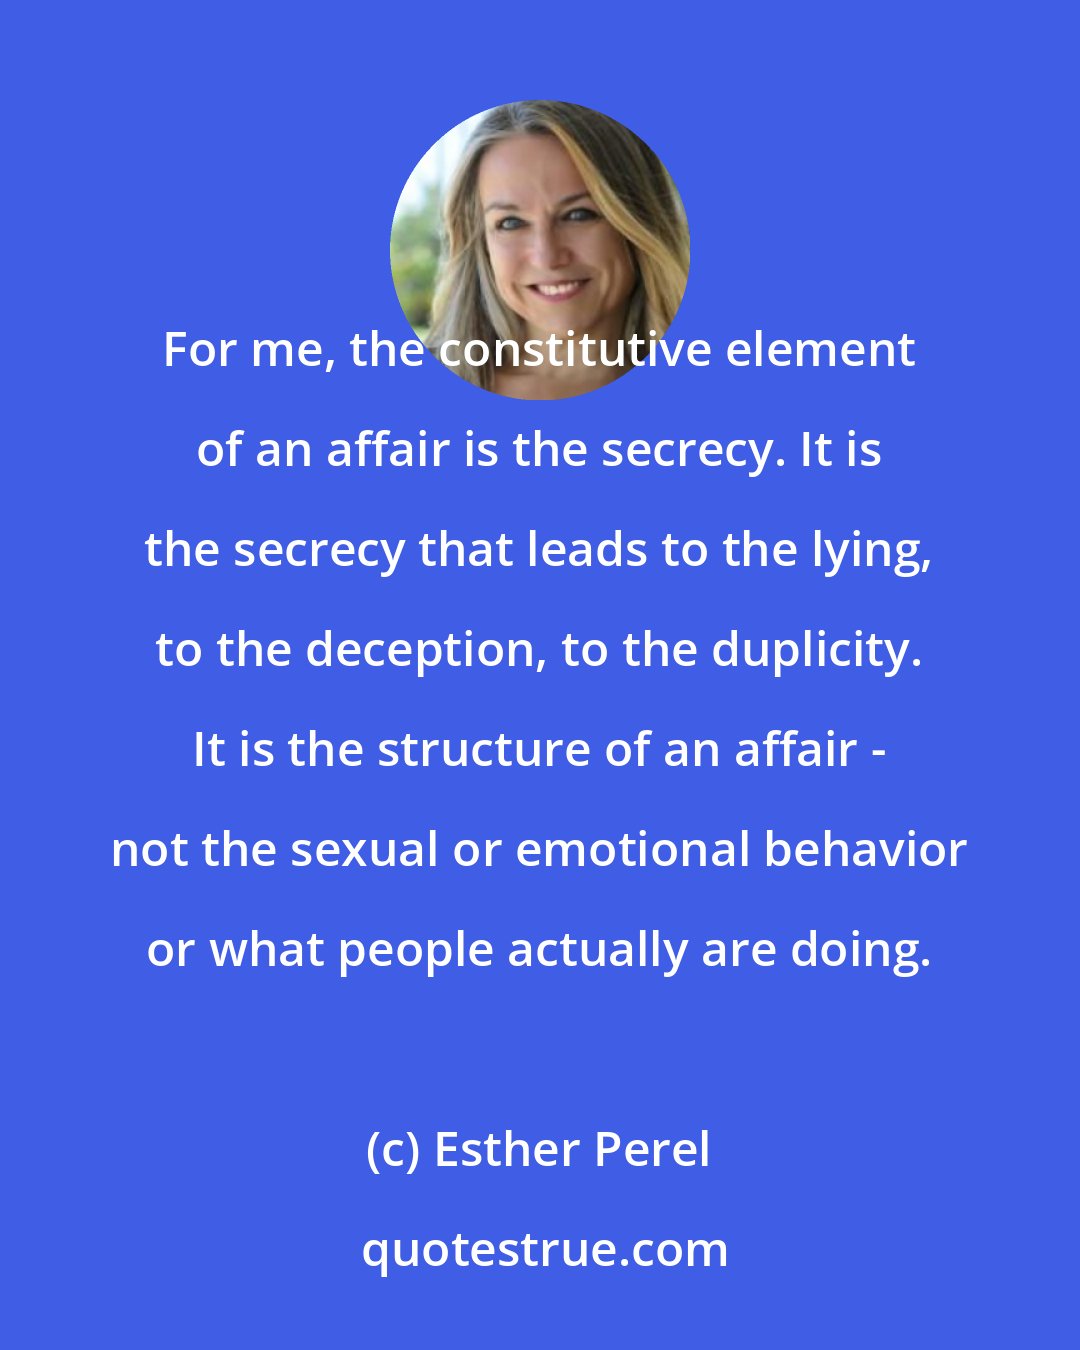 Esther Perel: For me, the constitutive element of an affair is the secrecy. It is the secrecy that leads to the lying, to the deception, to the duplicity. It is the structure of an affair - not the sexual or emotional behavior or what people actually are doing.